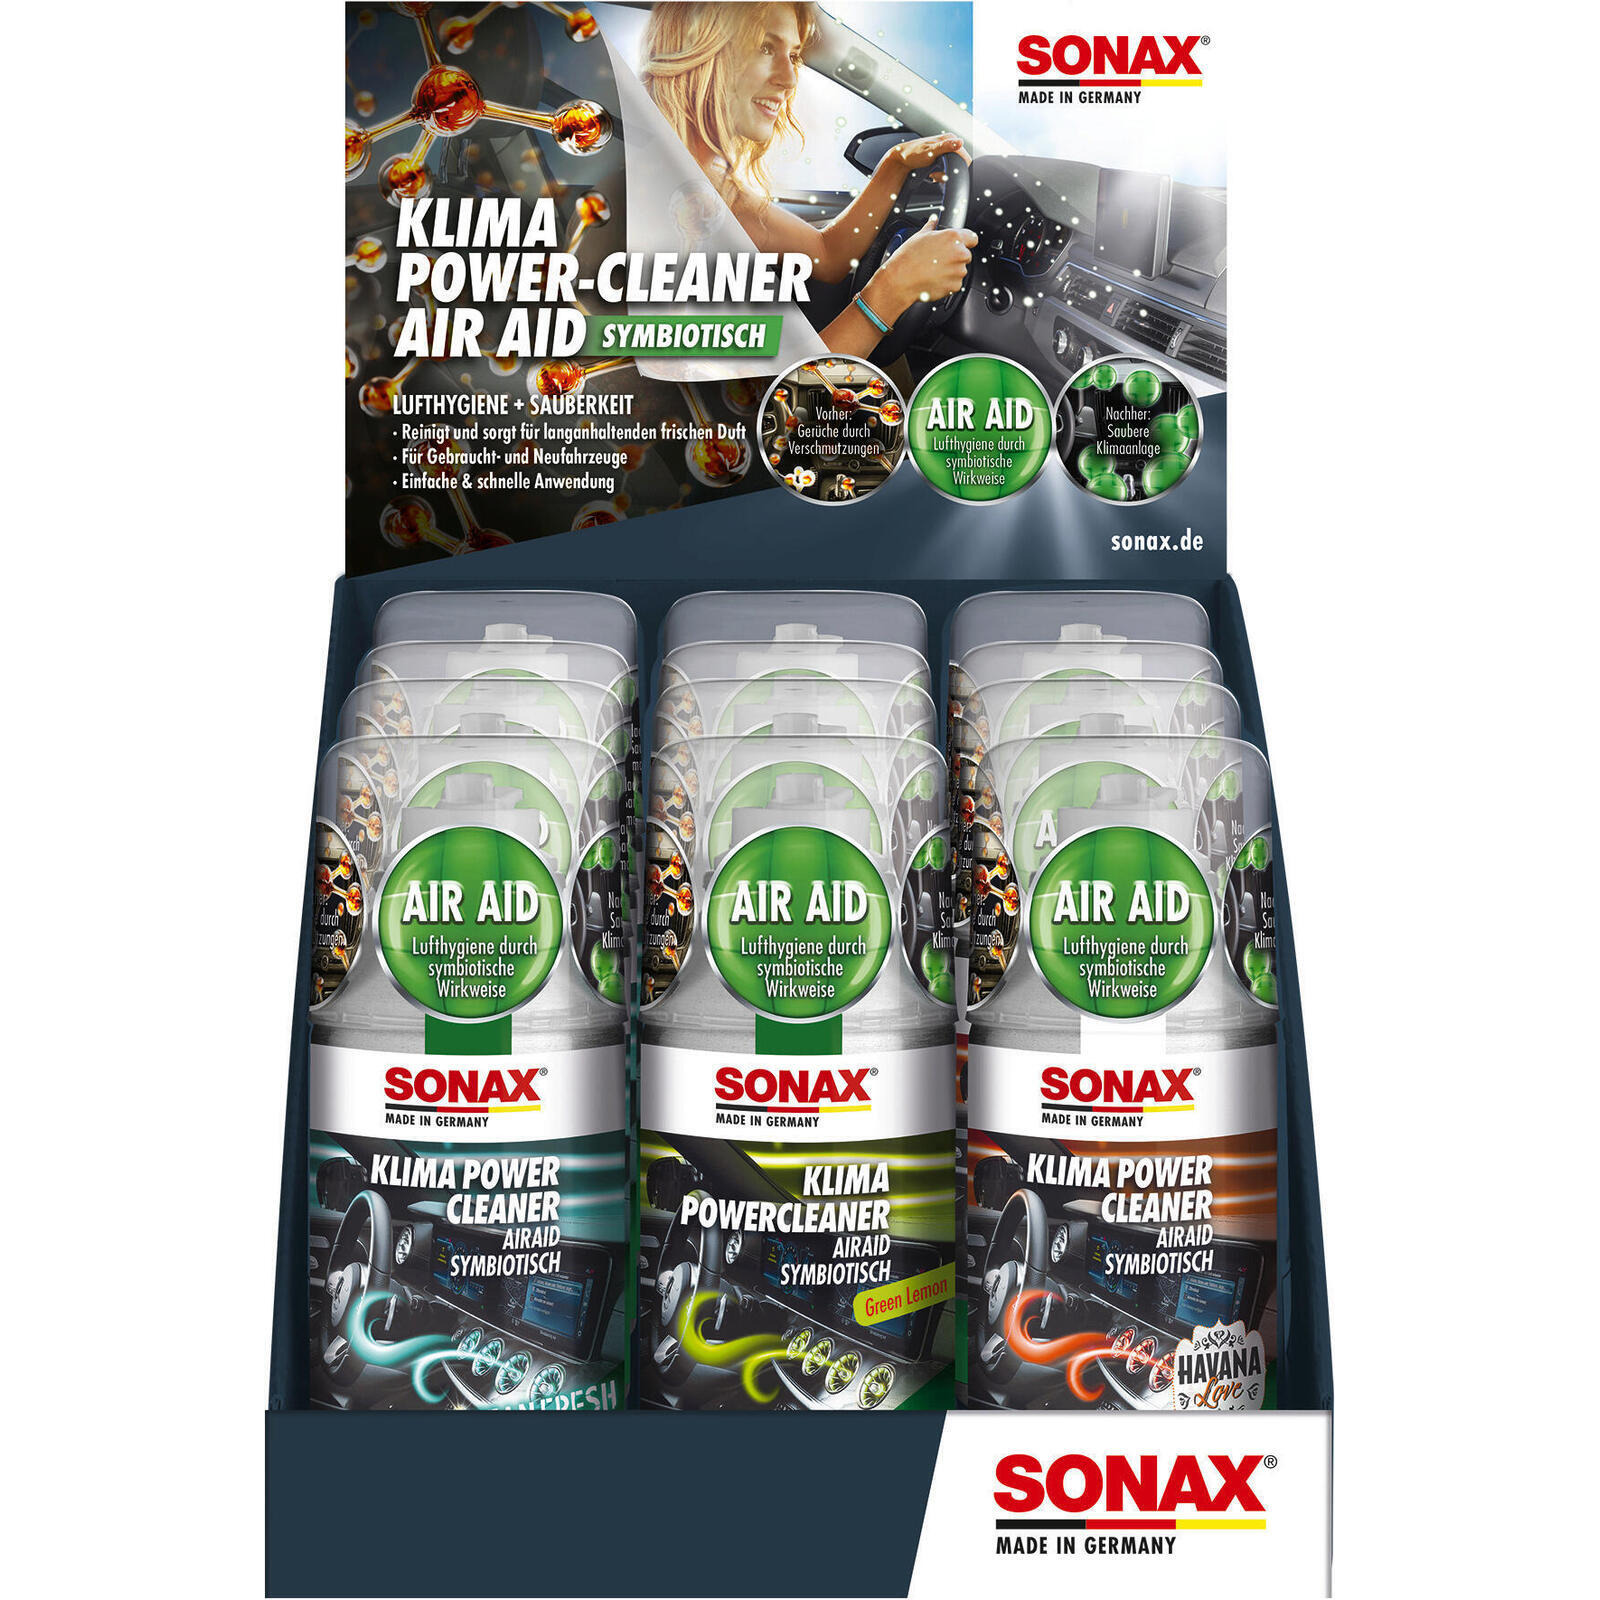 SONAX Air Conditioning Cleaner/-Disinfecter Car A/C cleaner AirAid symbiotic counterdisplay mixed